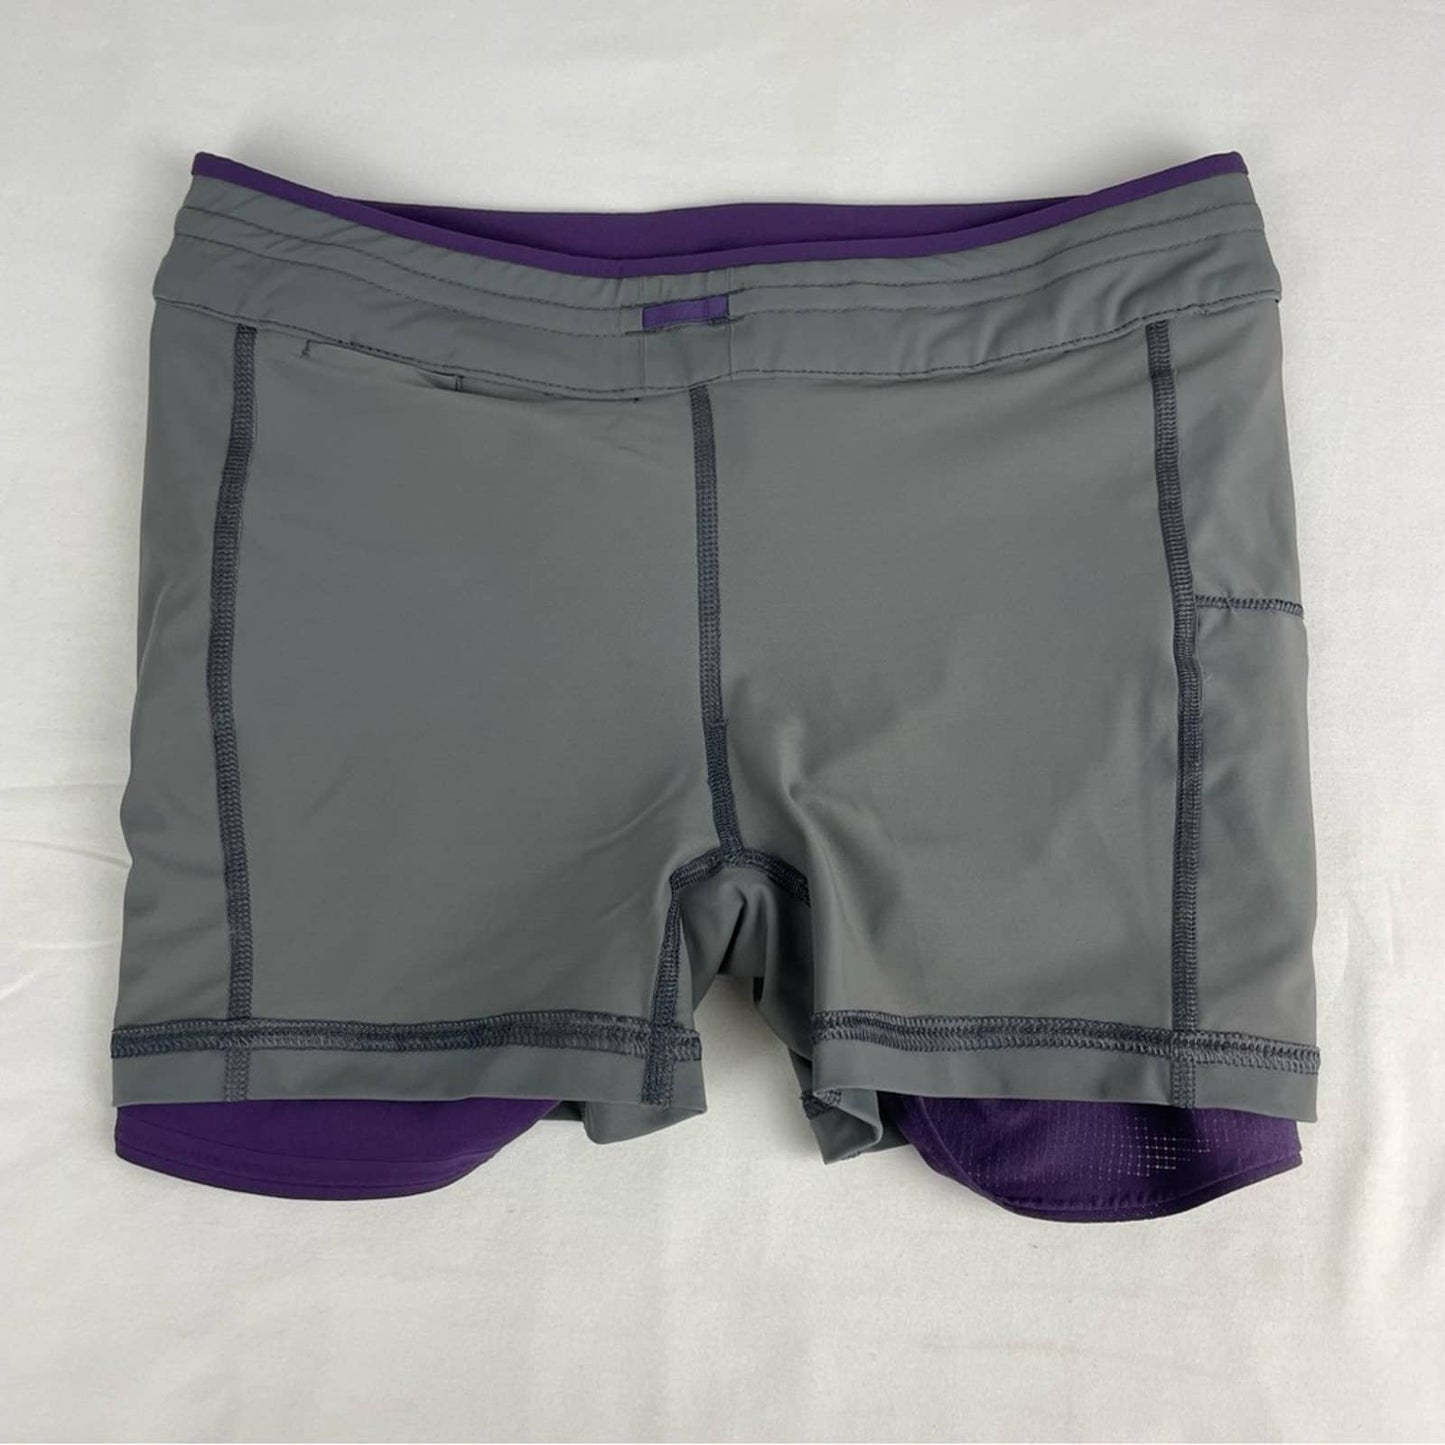 Outdoor Voices The Exercise Skort Indigo Eggplant Purple Active Athletic Skirt Size S